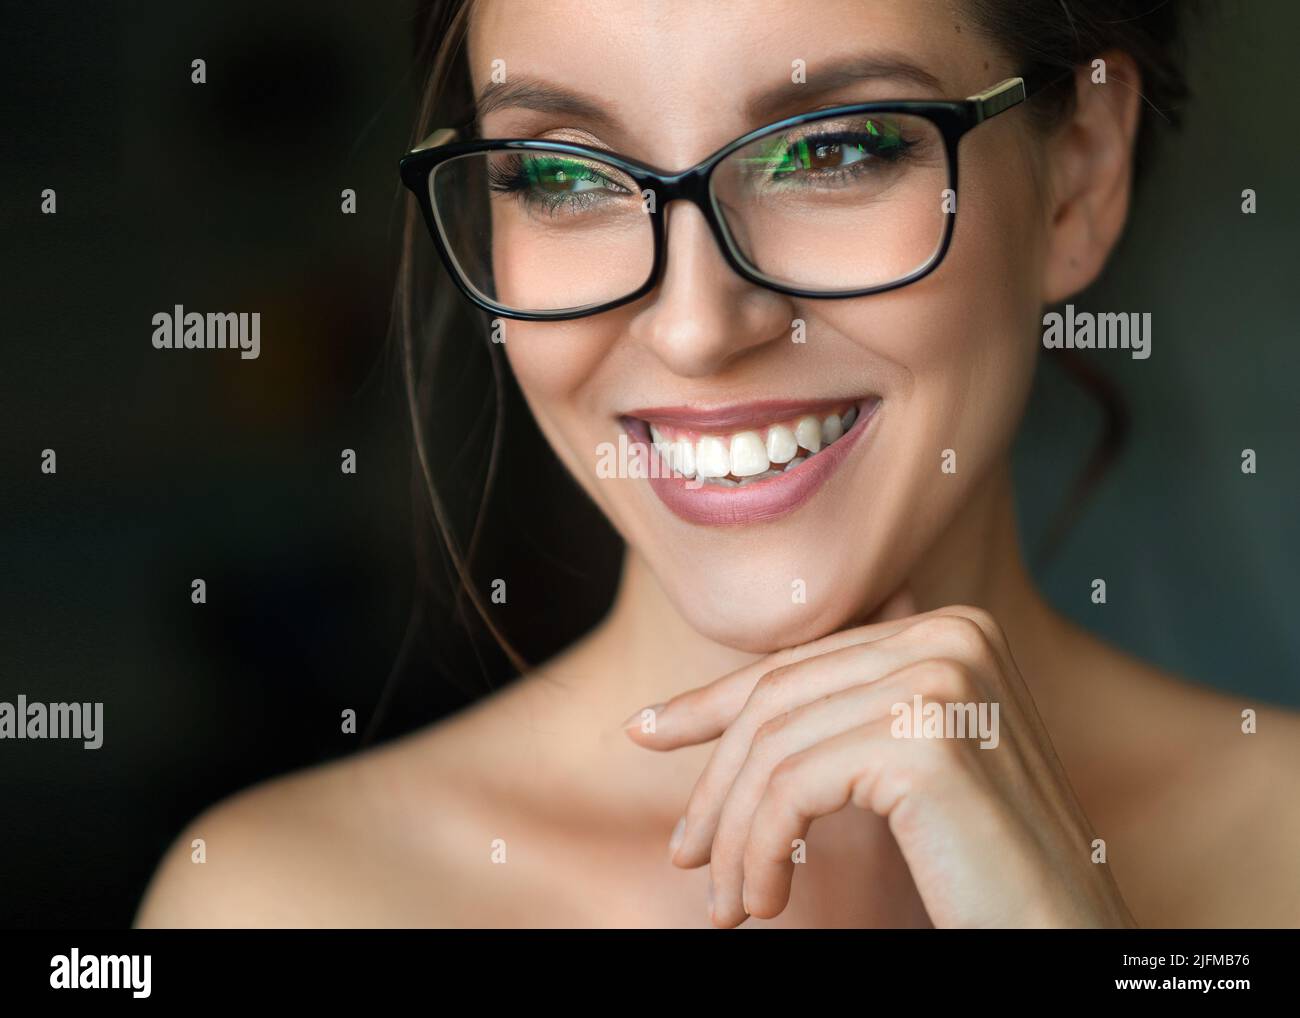 Close up photo of a happy smiling woman in eyeglasses. Eyesight health concept. Stock Photo